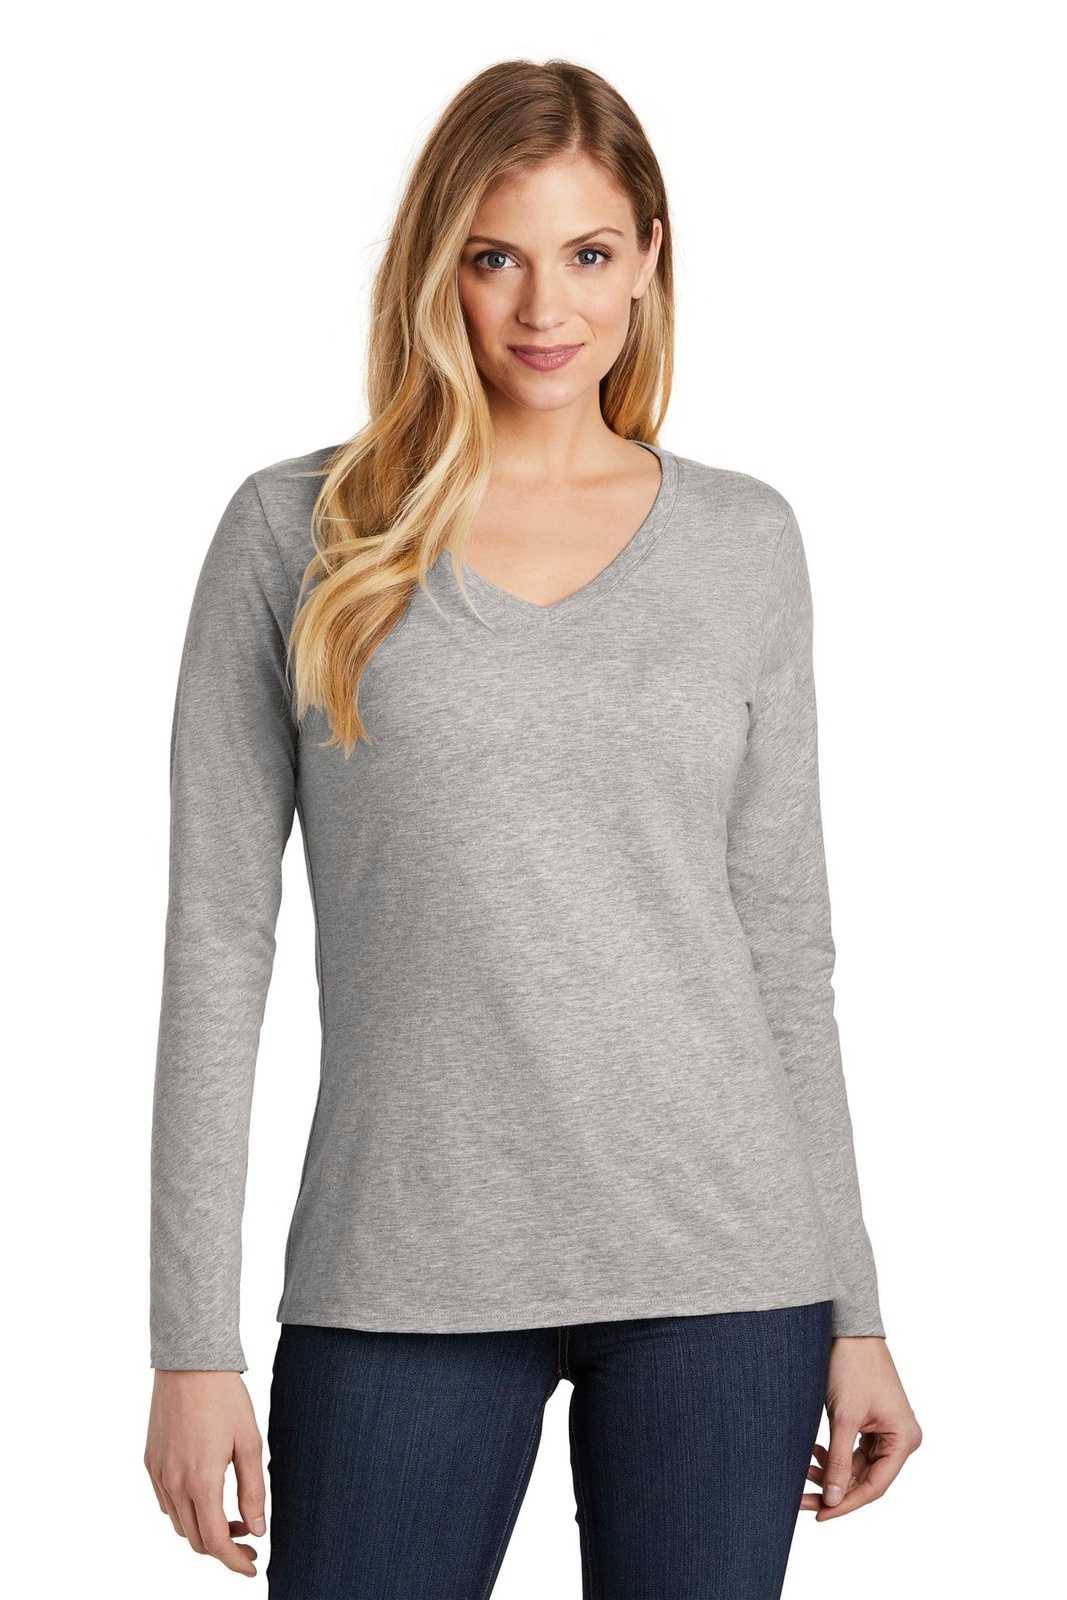 District DT6201 Women's Very Important Tee Long Sleeve V-Neck - Light Heather Gray - HIT a Double - 1